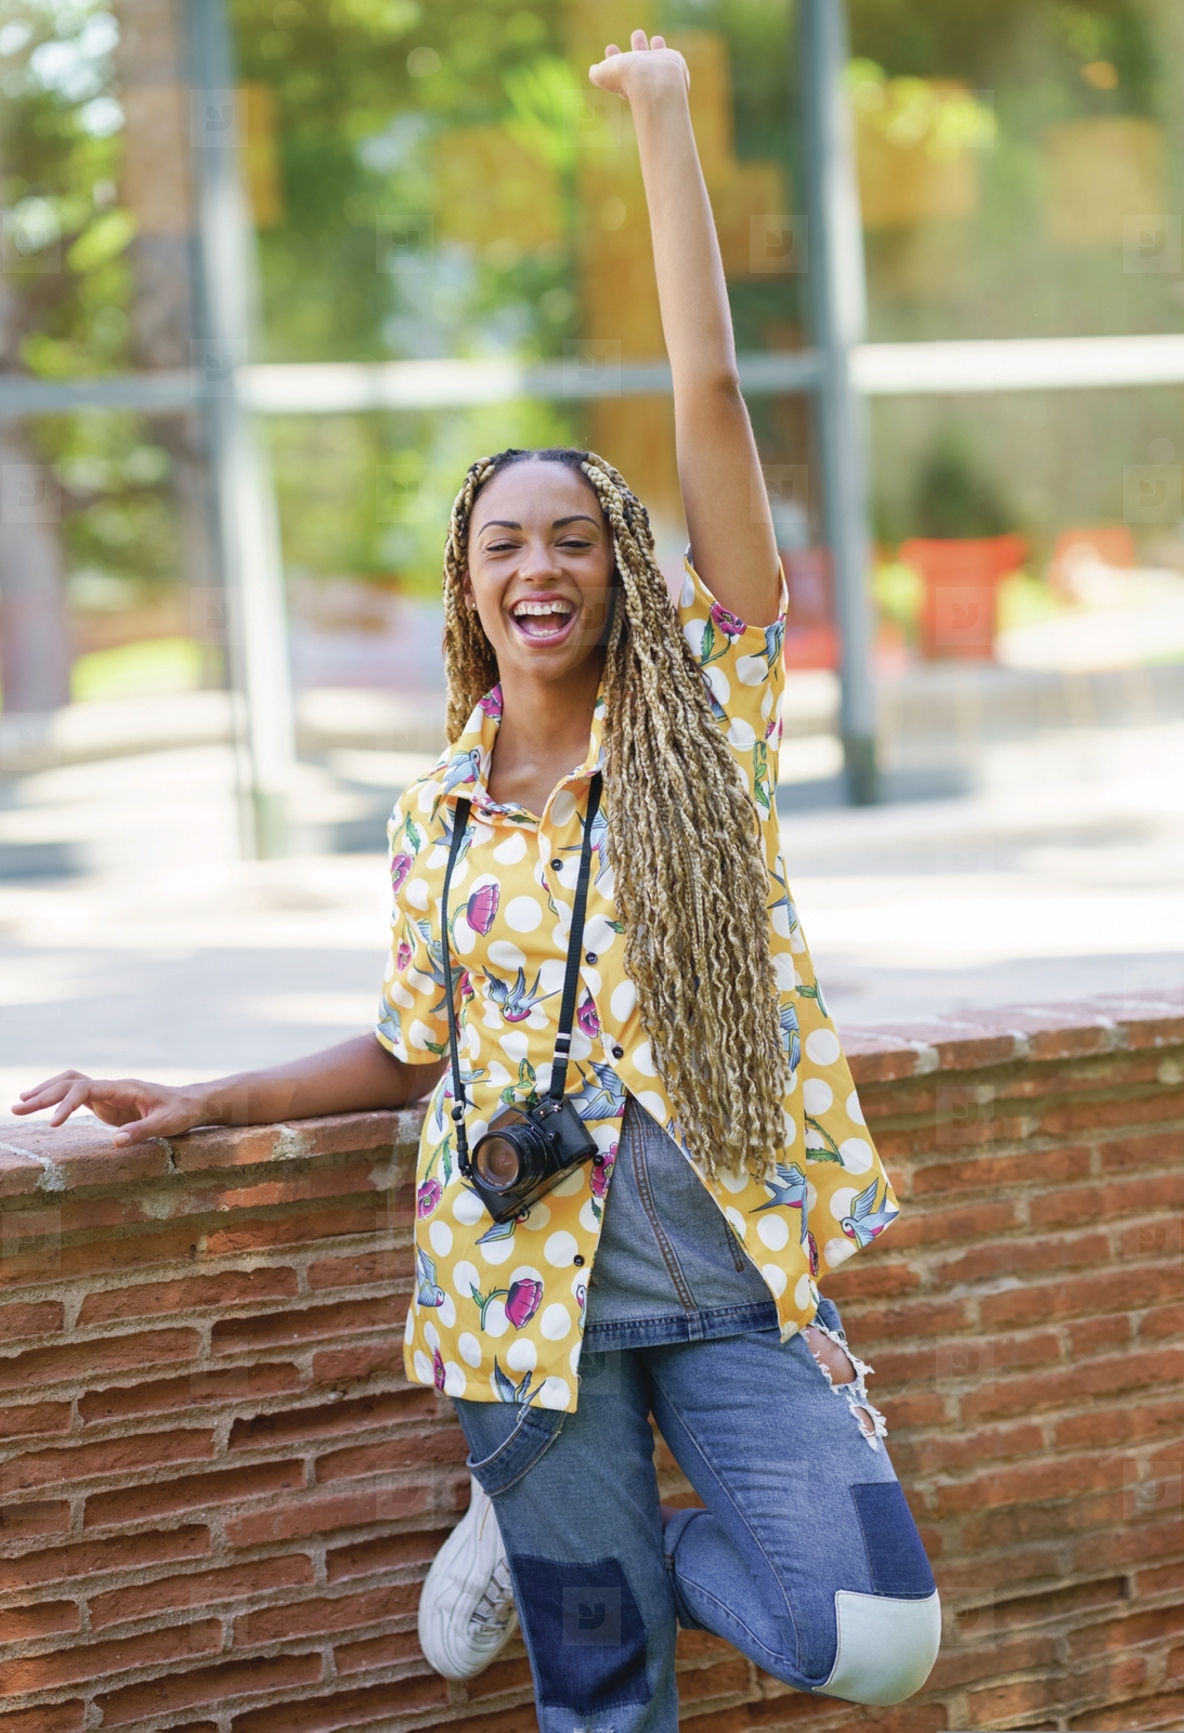 Black female with African braids  raising her arm in joy  Girl holding a camera